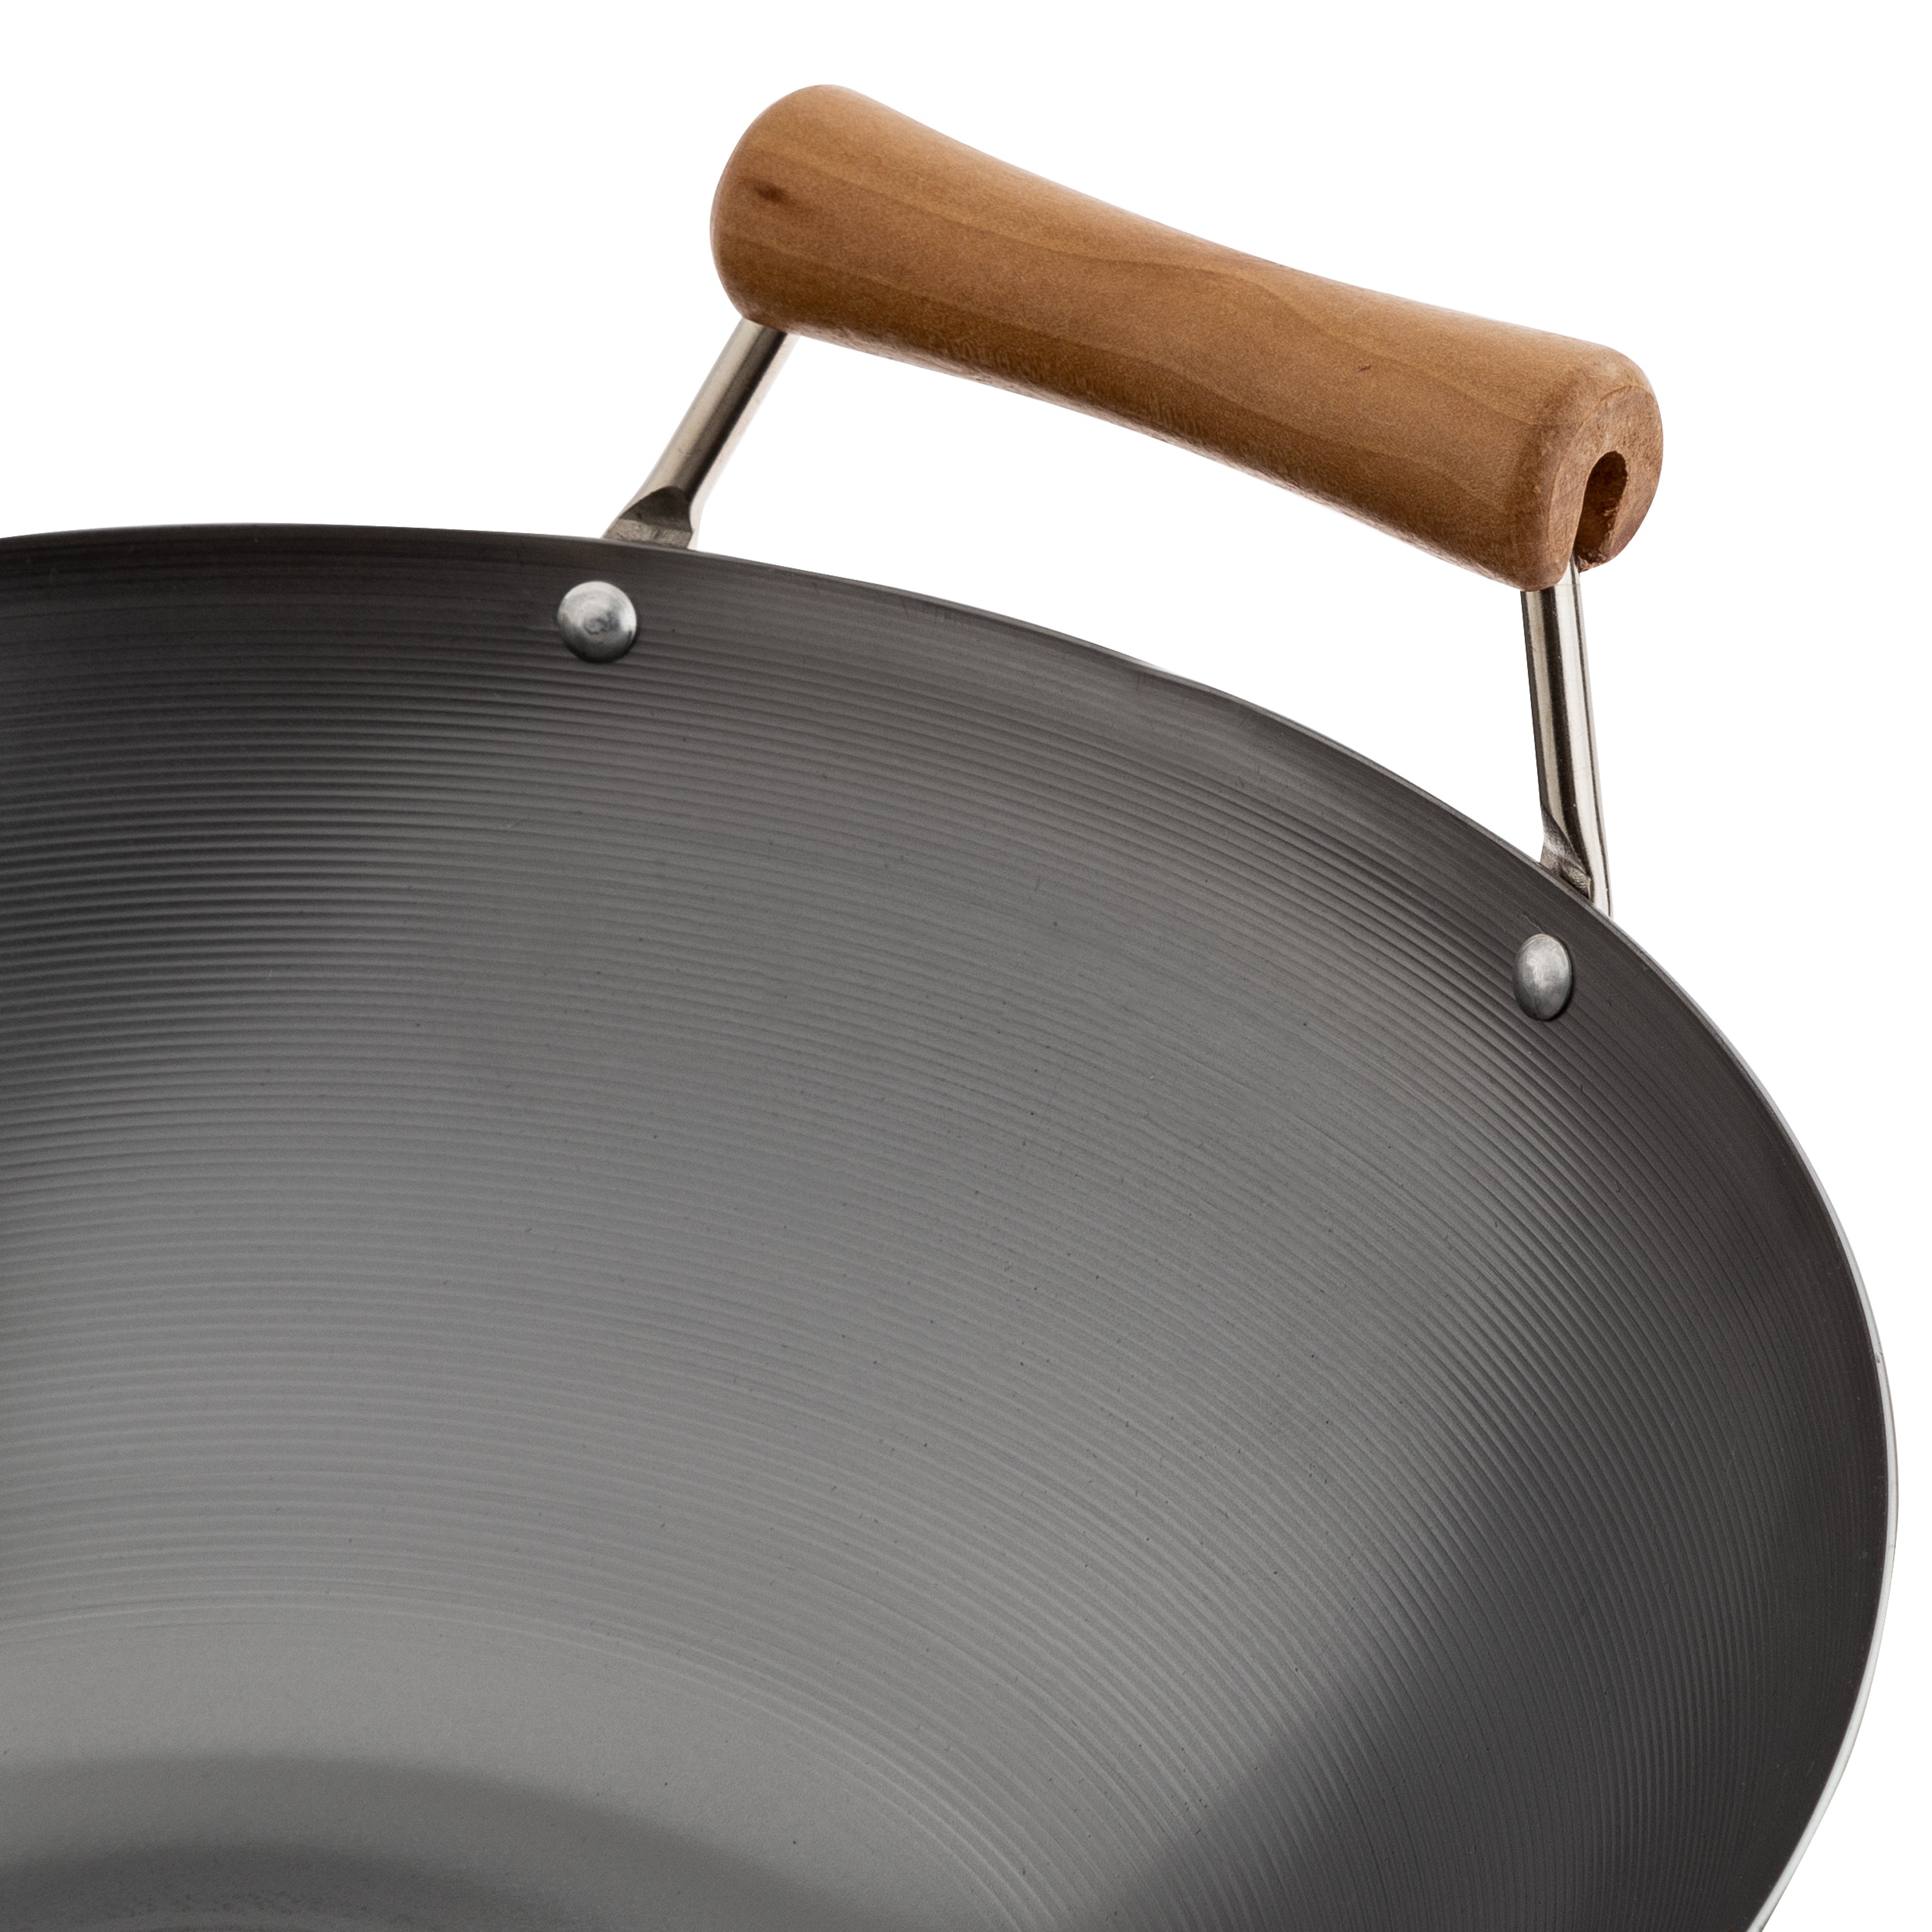 Classic Series 14-Inch Uncoated Carbon Steel Flat Bottom Wok Set with Lid and Birch Handles, 4 Pieces